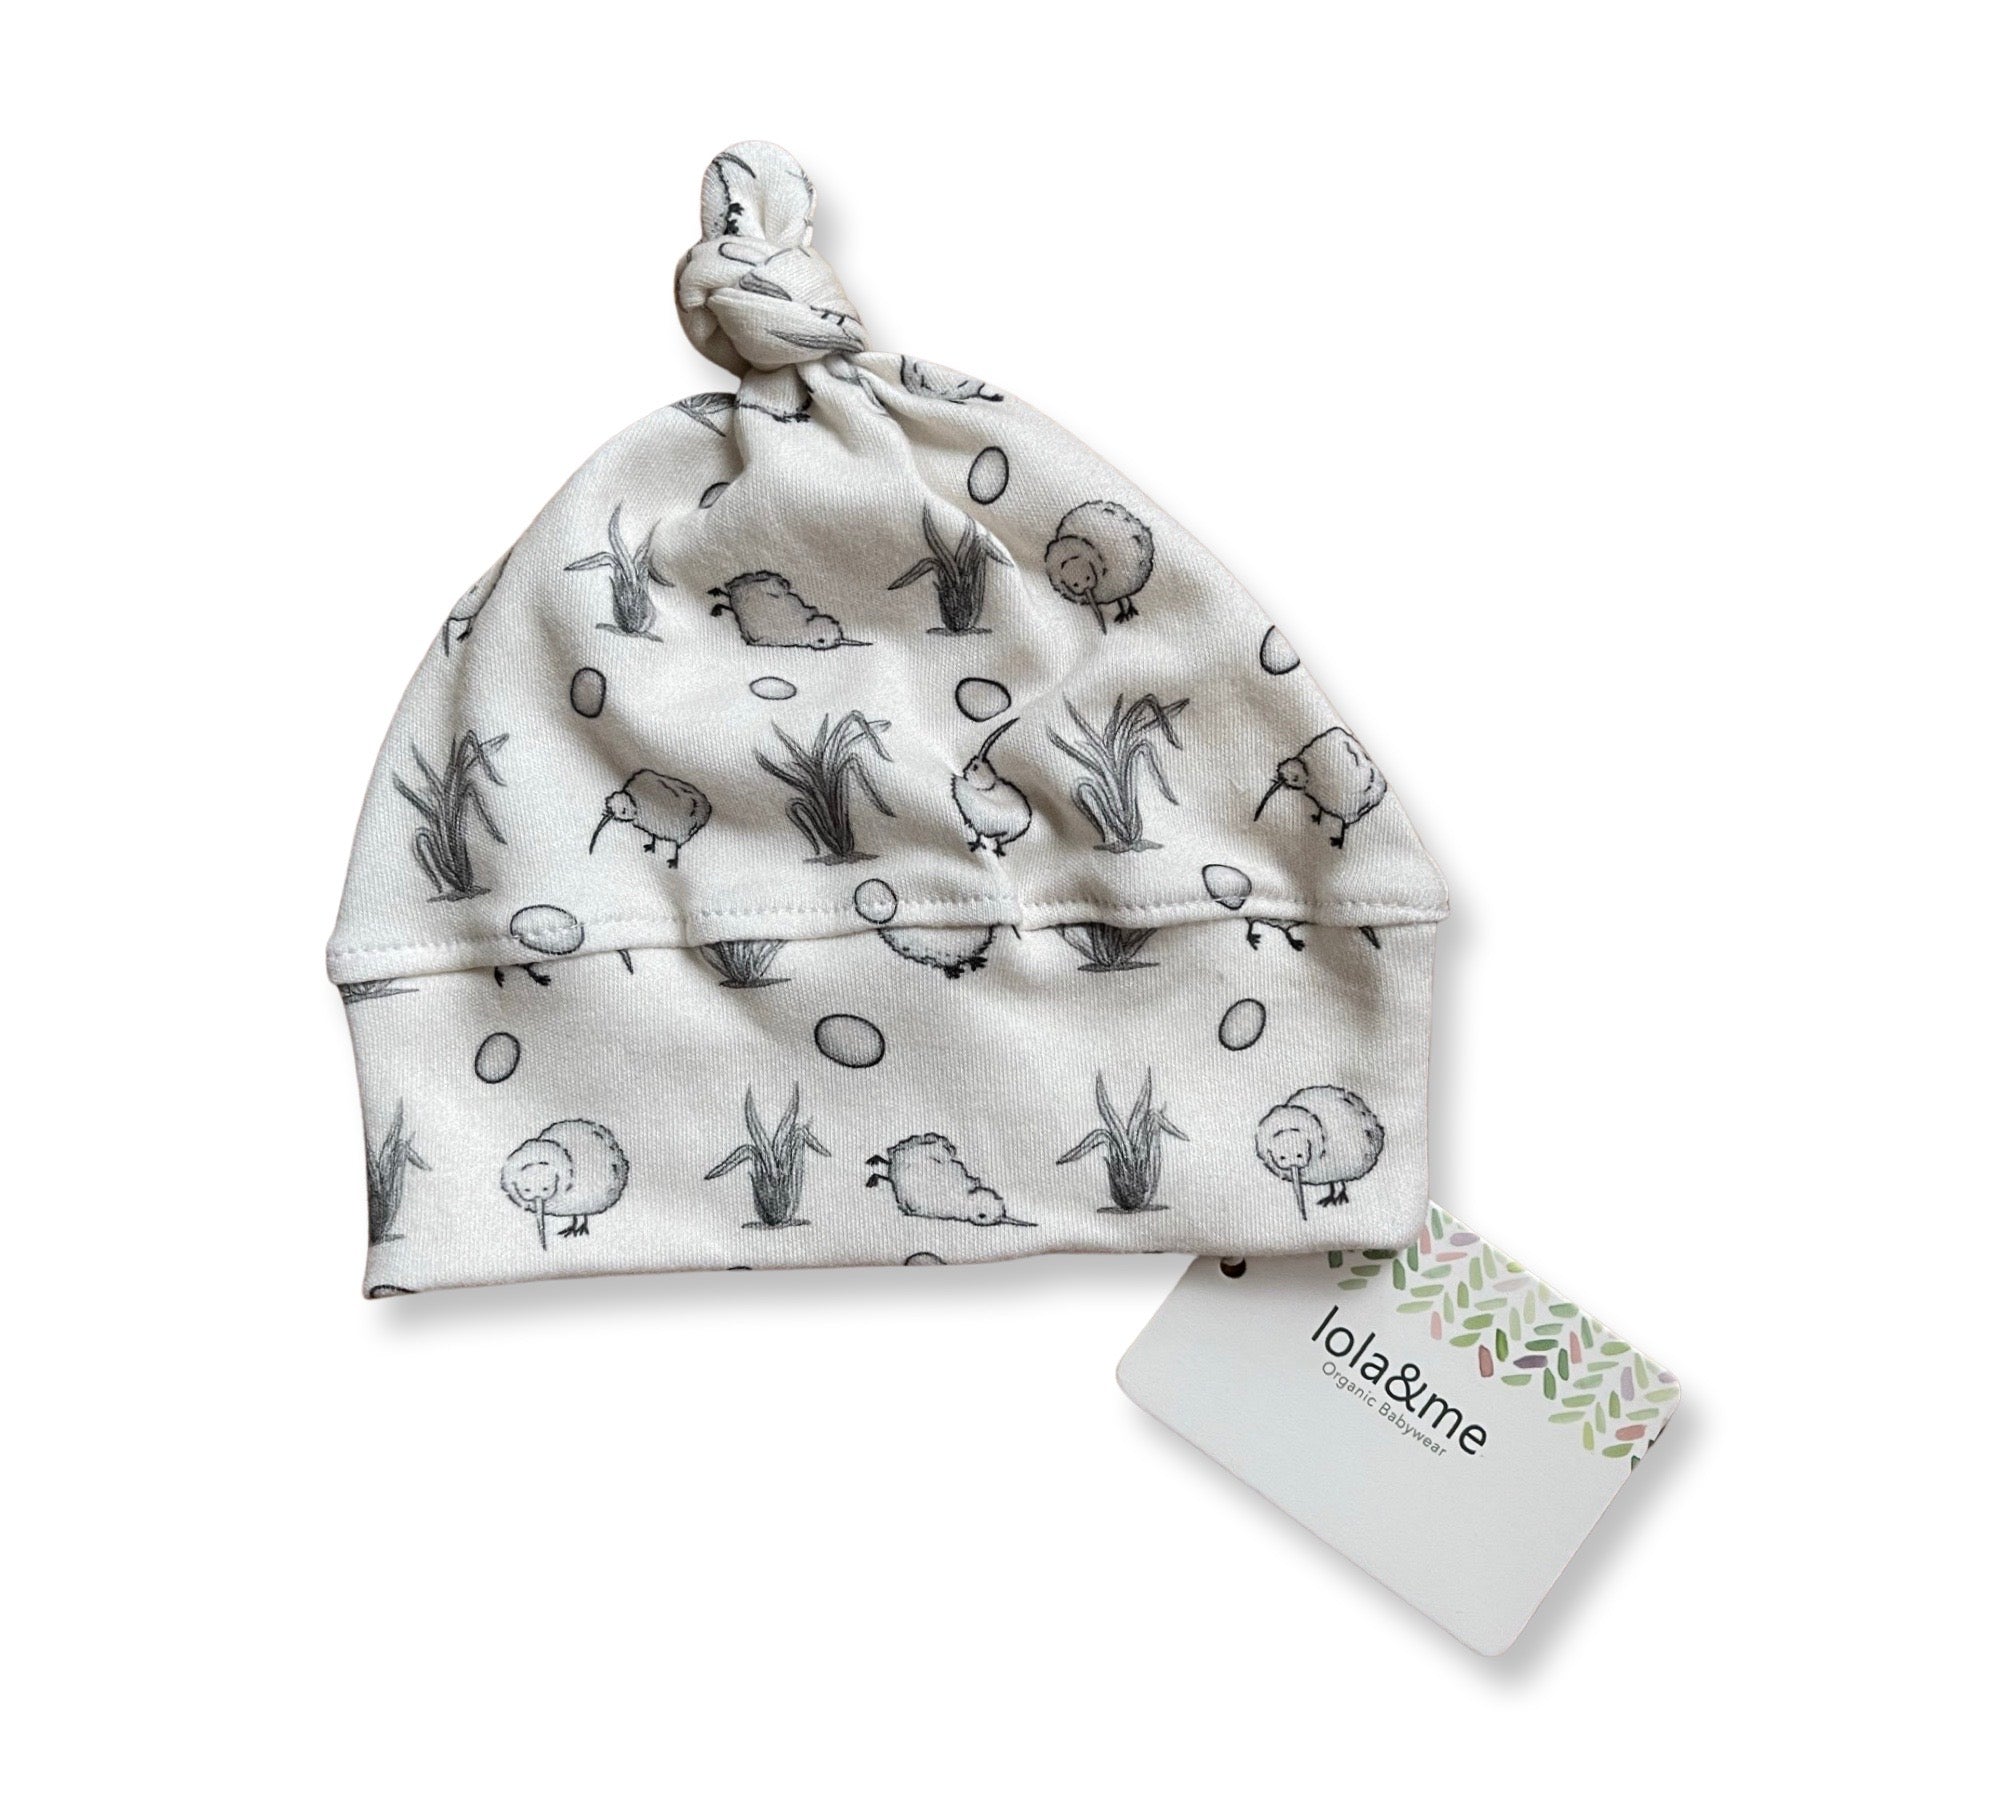 A soft, New Arrival newborn baby beanie with a cute woodland animal print on a white background, displayed next to its product tag, perfect as part of a giftbox co. newborn baby giftbox.